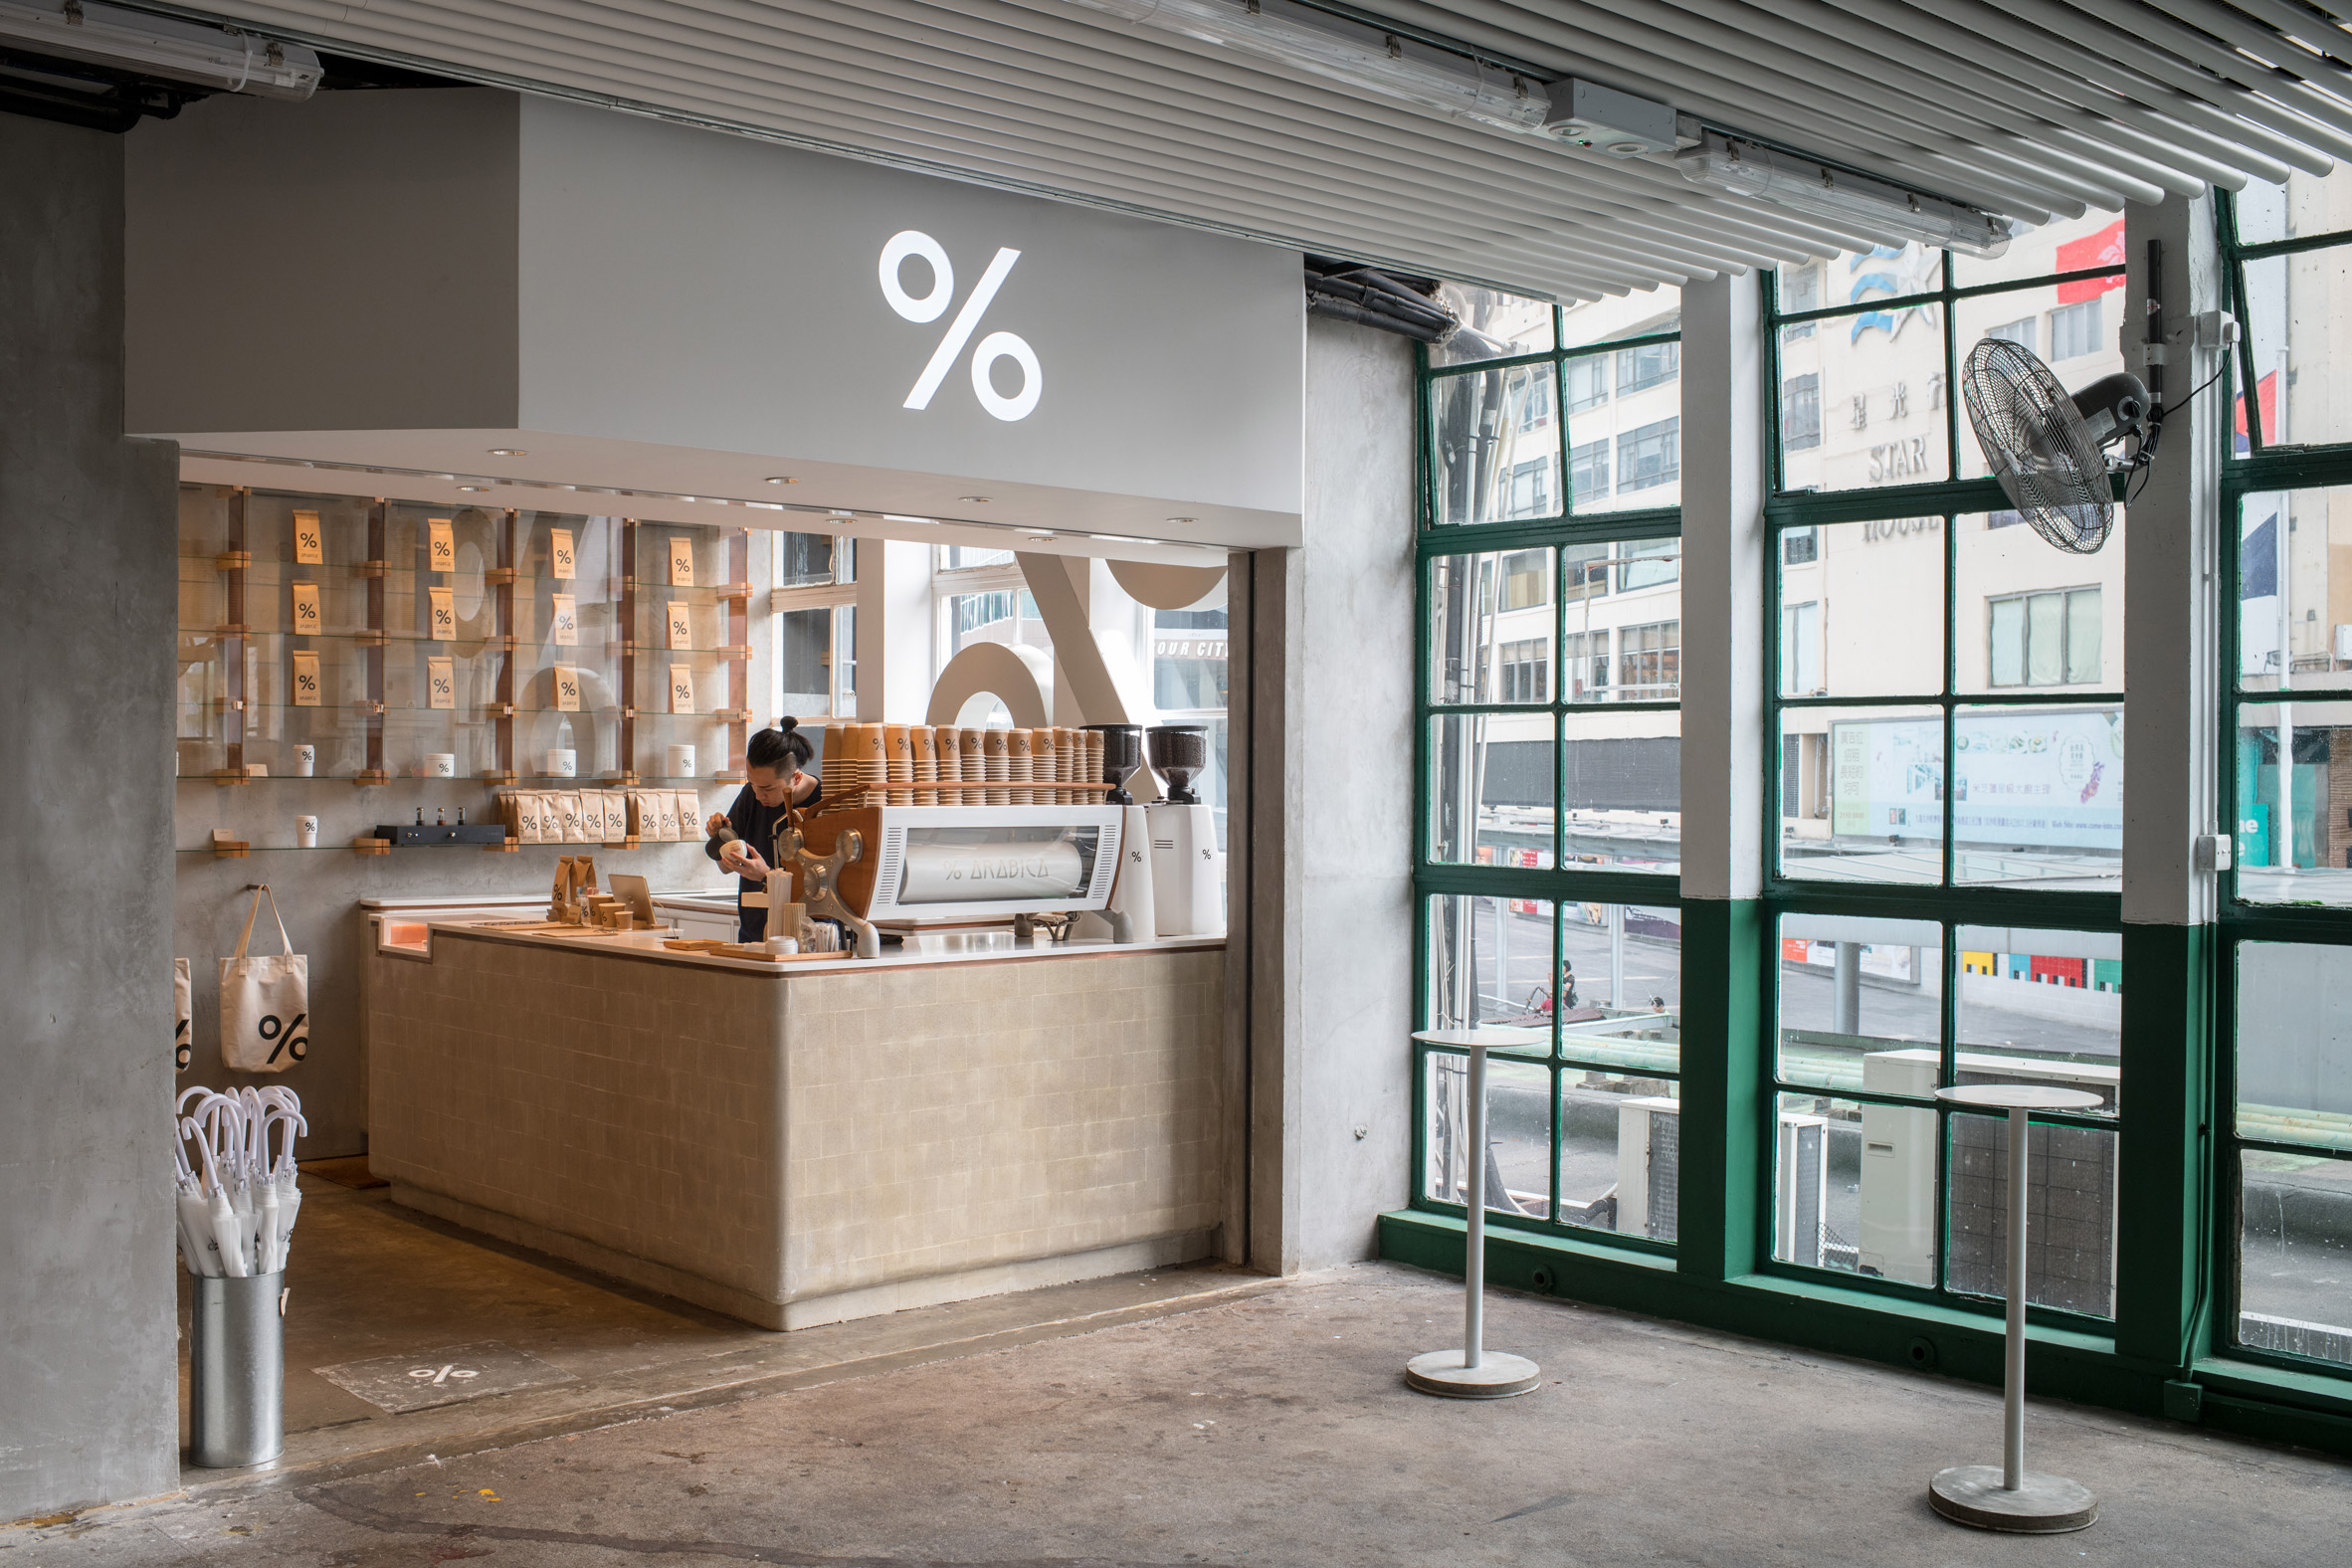 Puddle completes concrete coffee shop at Hong Kong's Star Ferry terminal